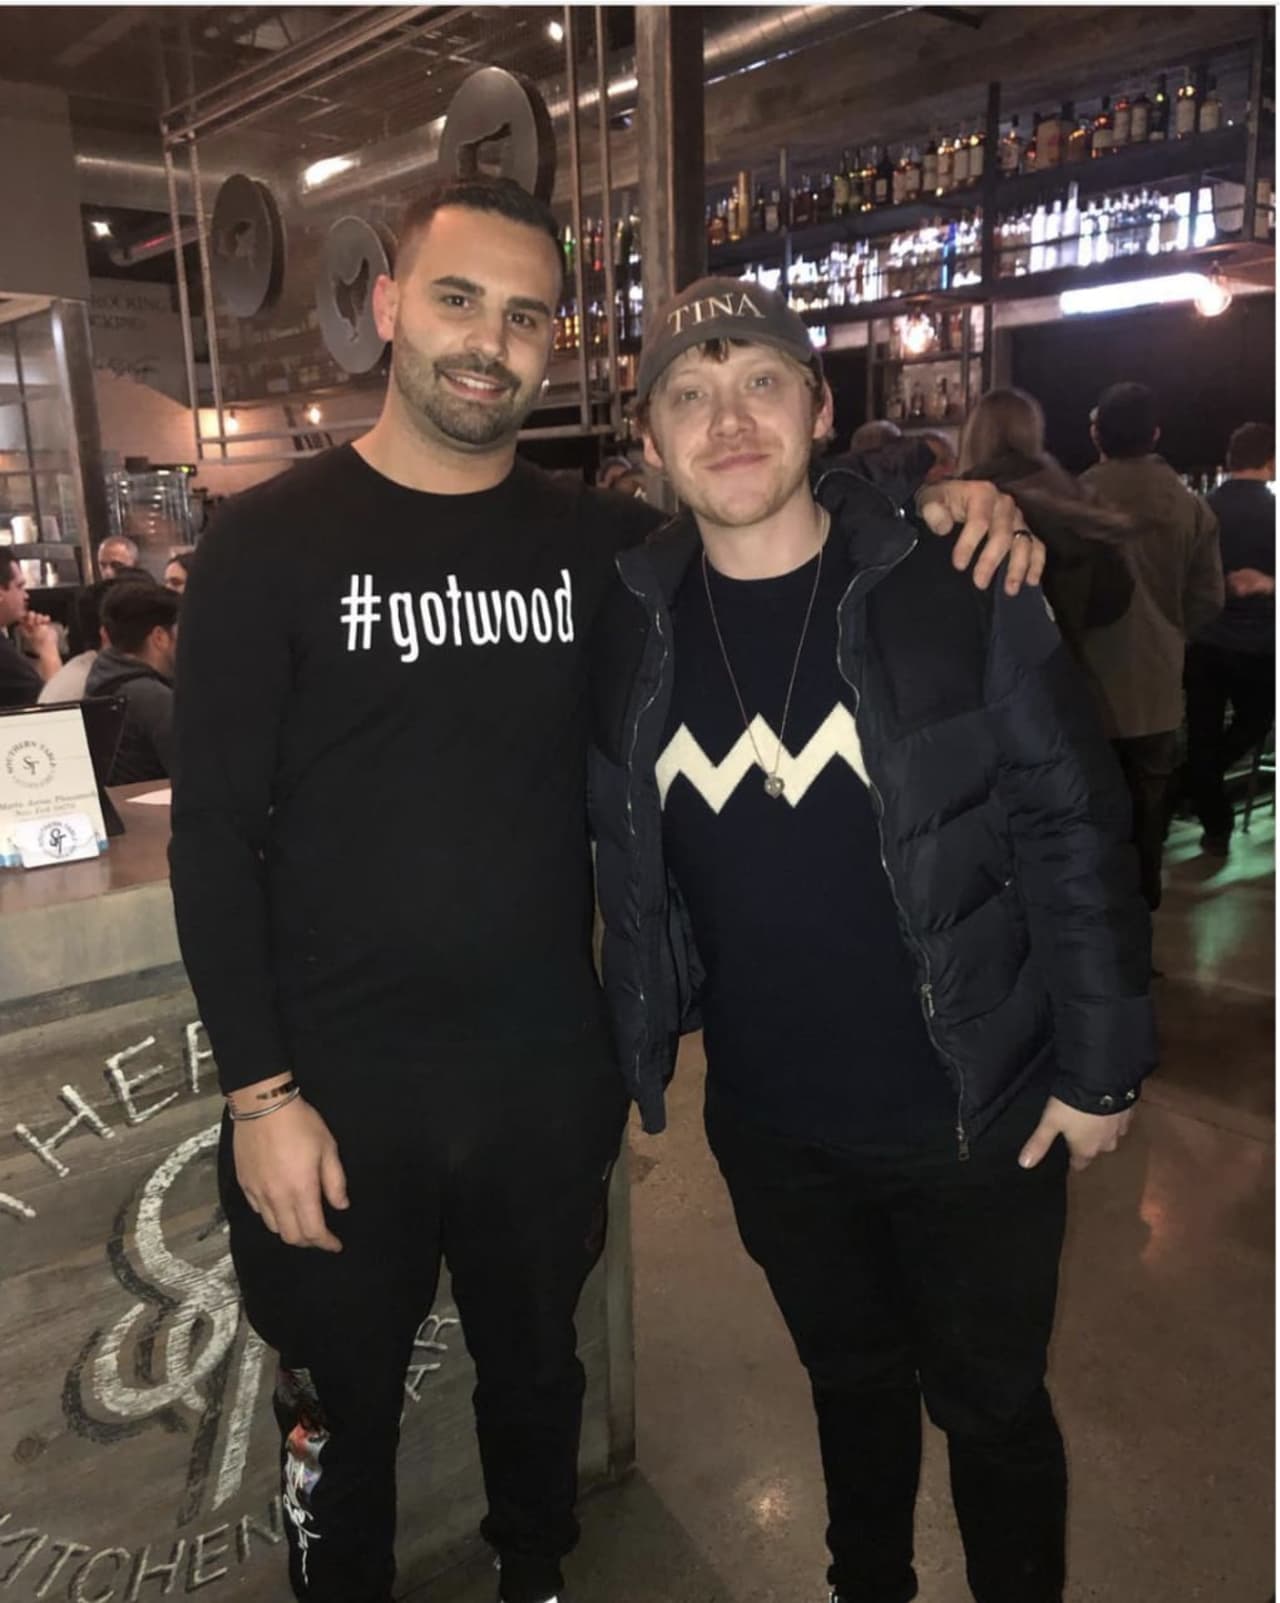 Southern Table & Bar owner Michael Ferrara with recent visitor Rupert Grint of Harry Potter fame.